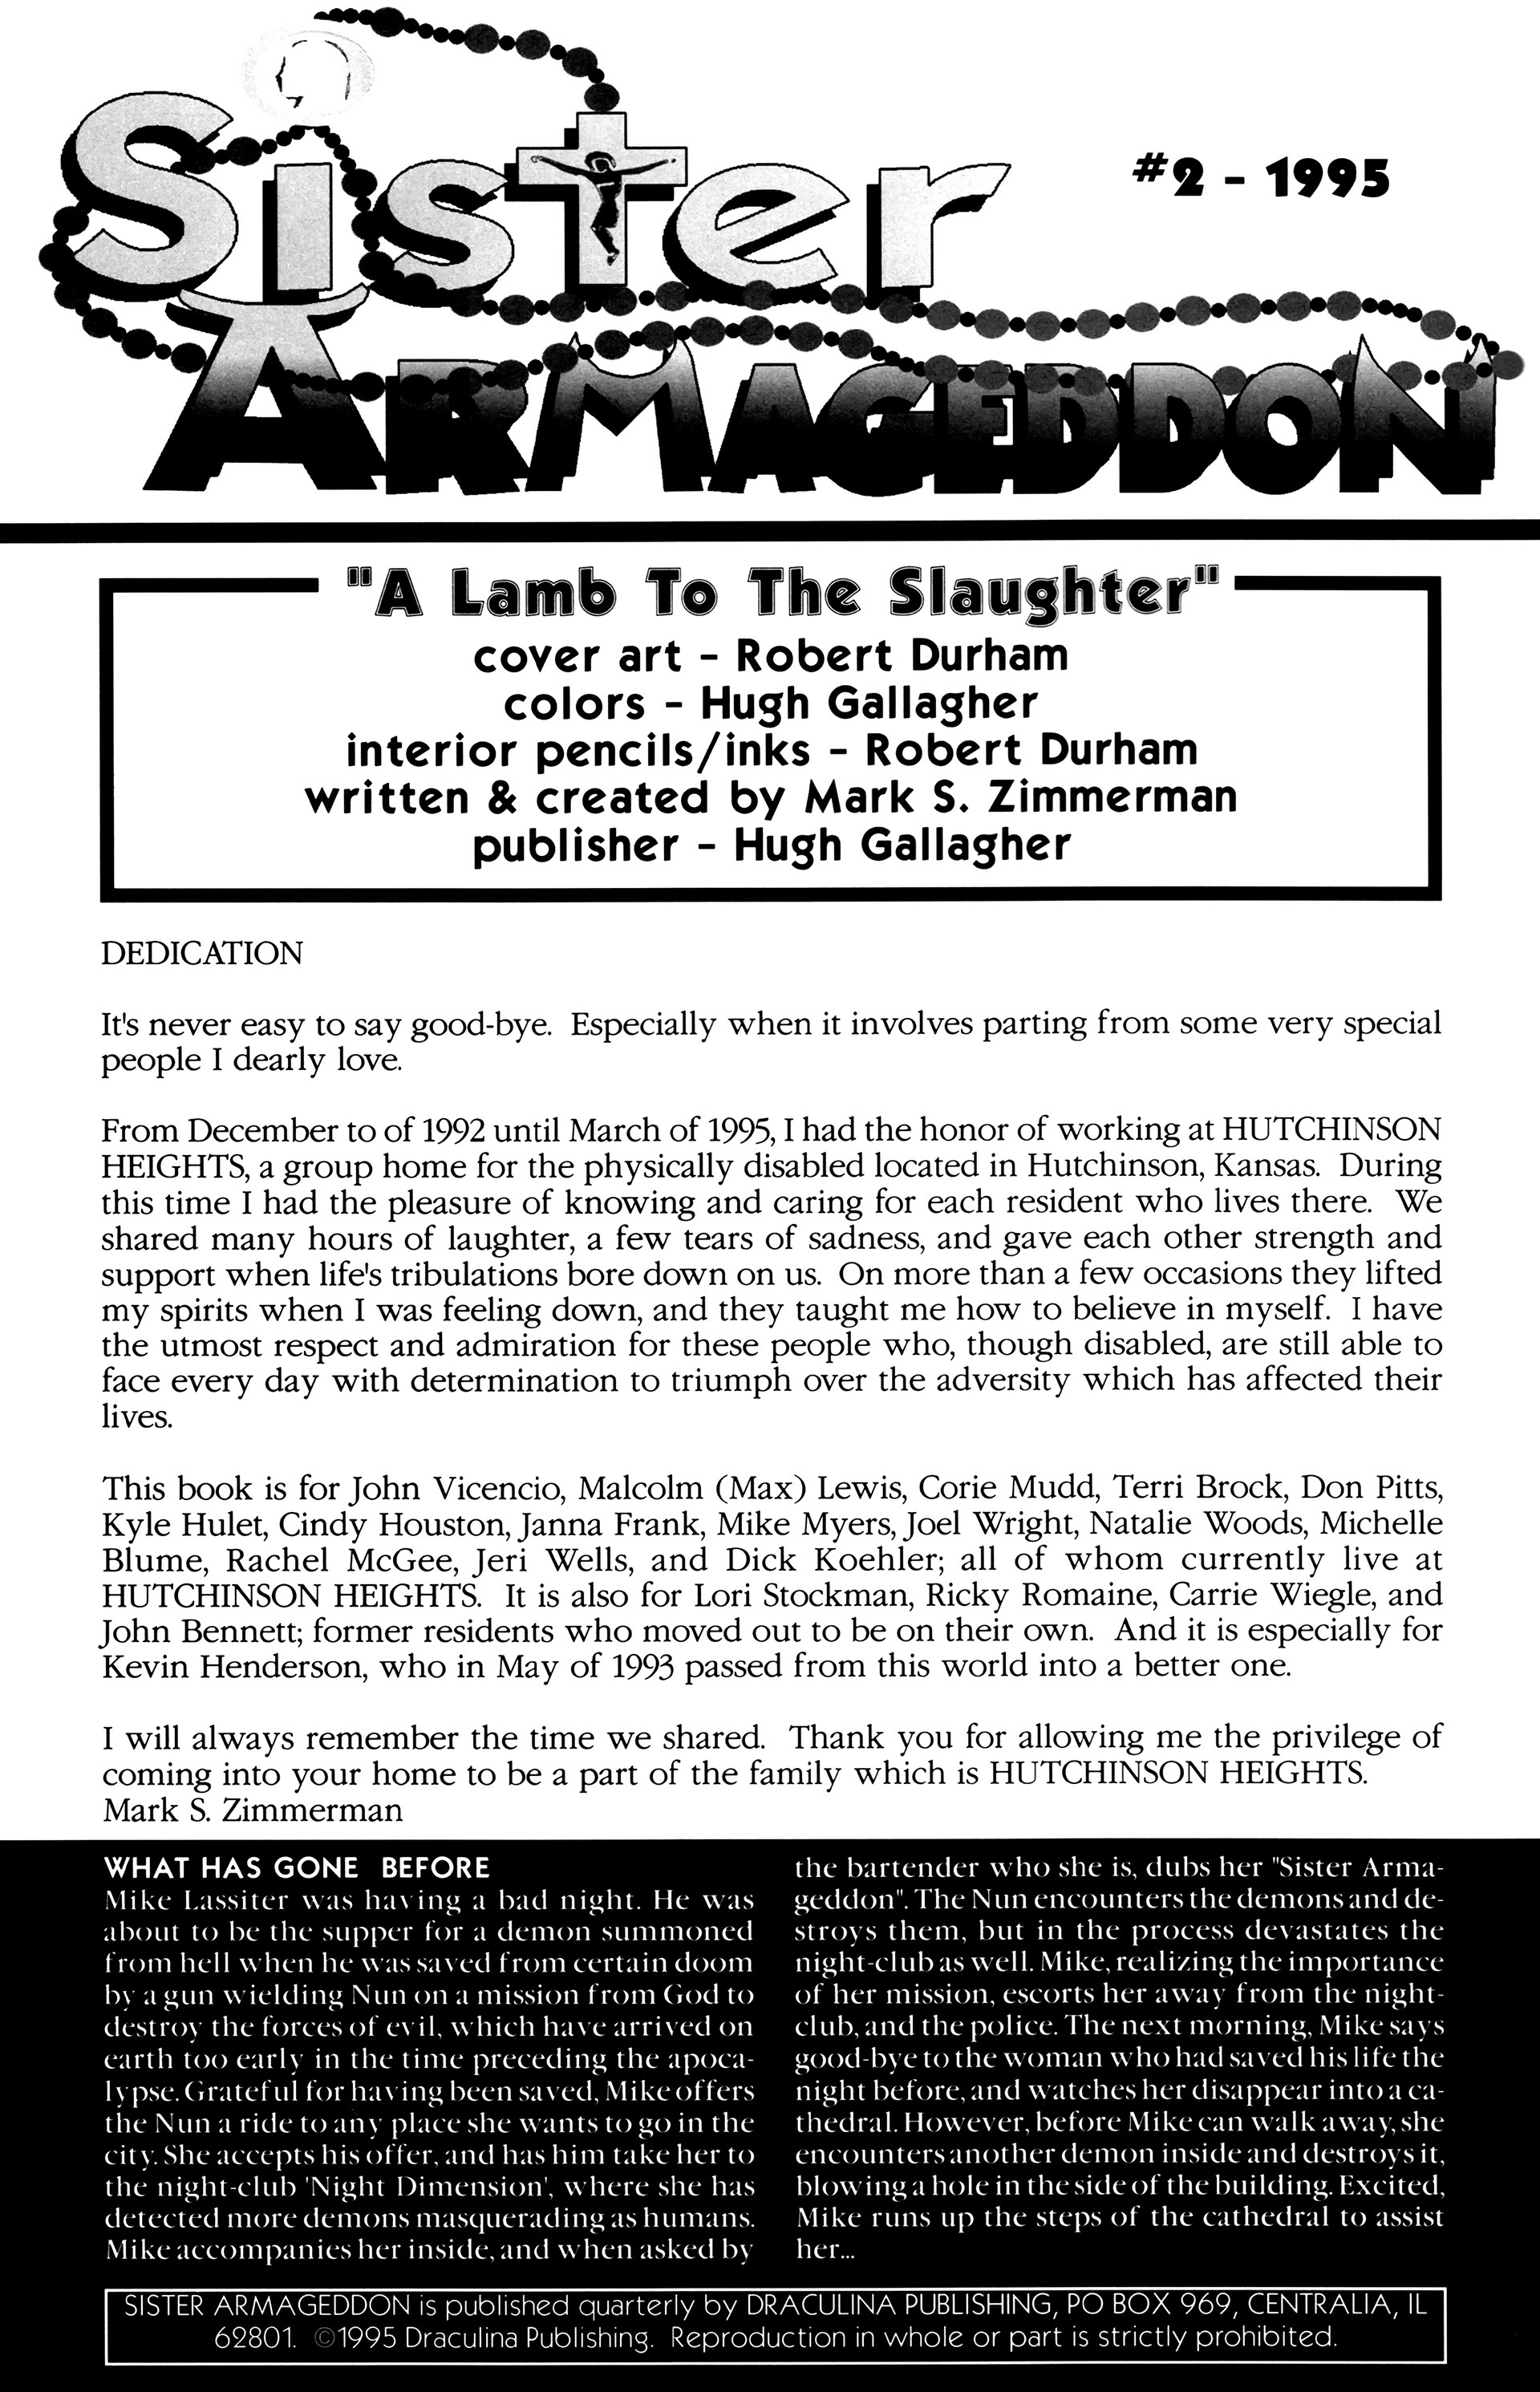 Read online Sister Armageddon comic -  Issue #2 - 2